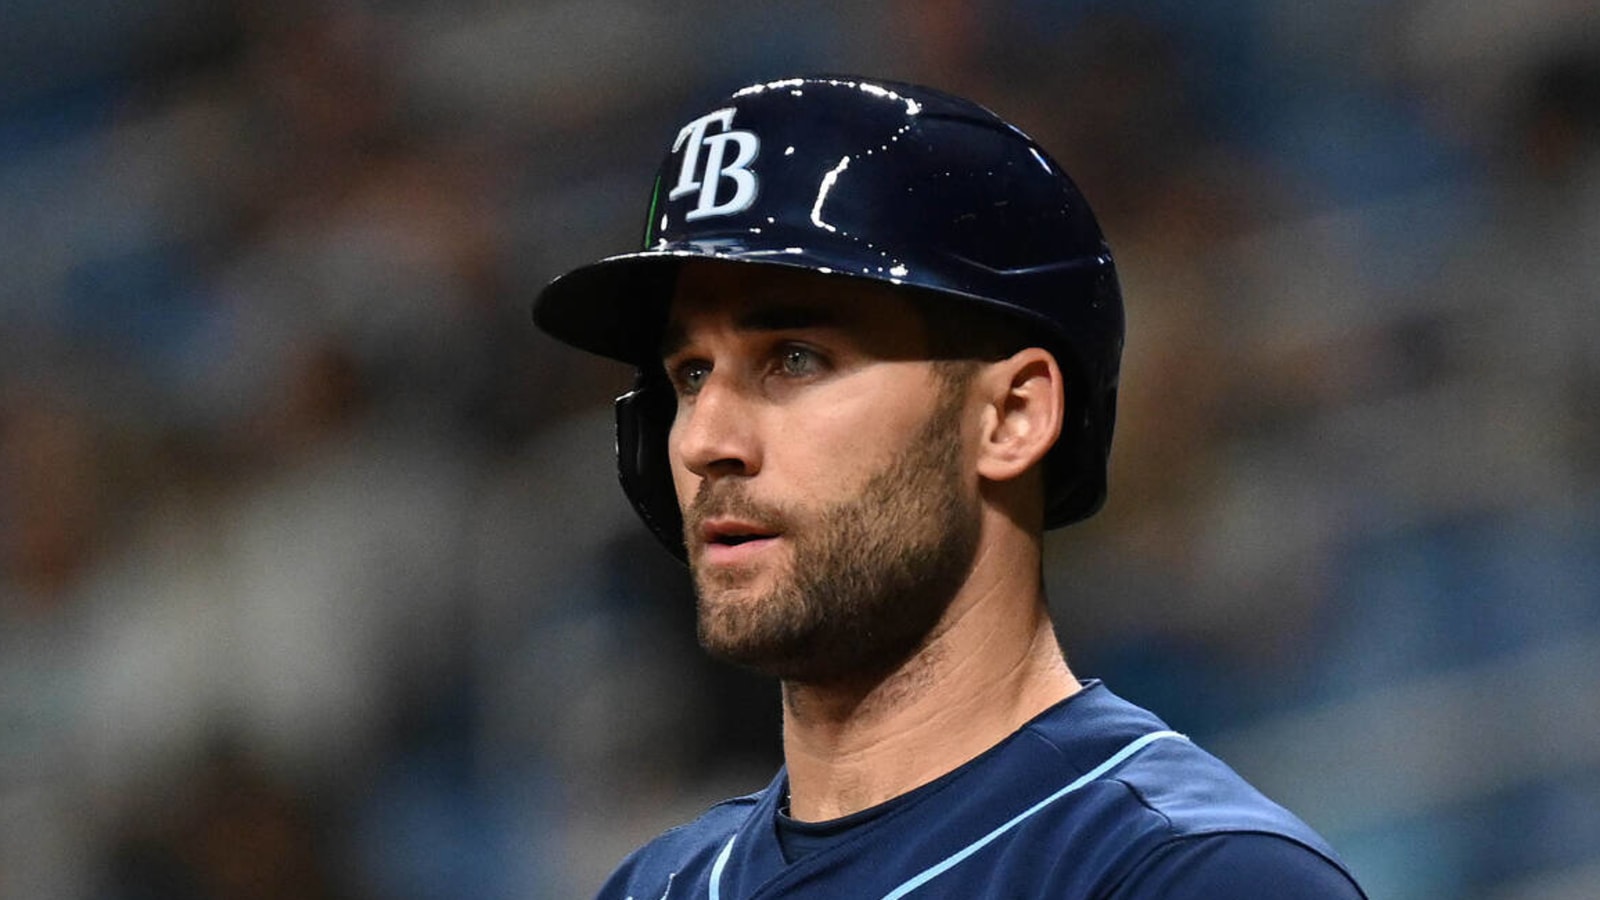 Kevin Kiermaier: Playing on Rays' artificial turf is 'a big issue'